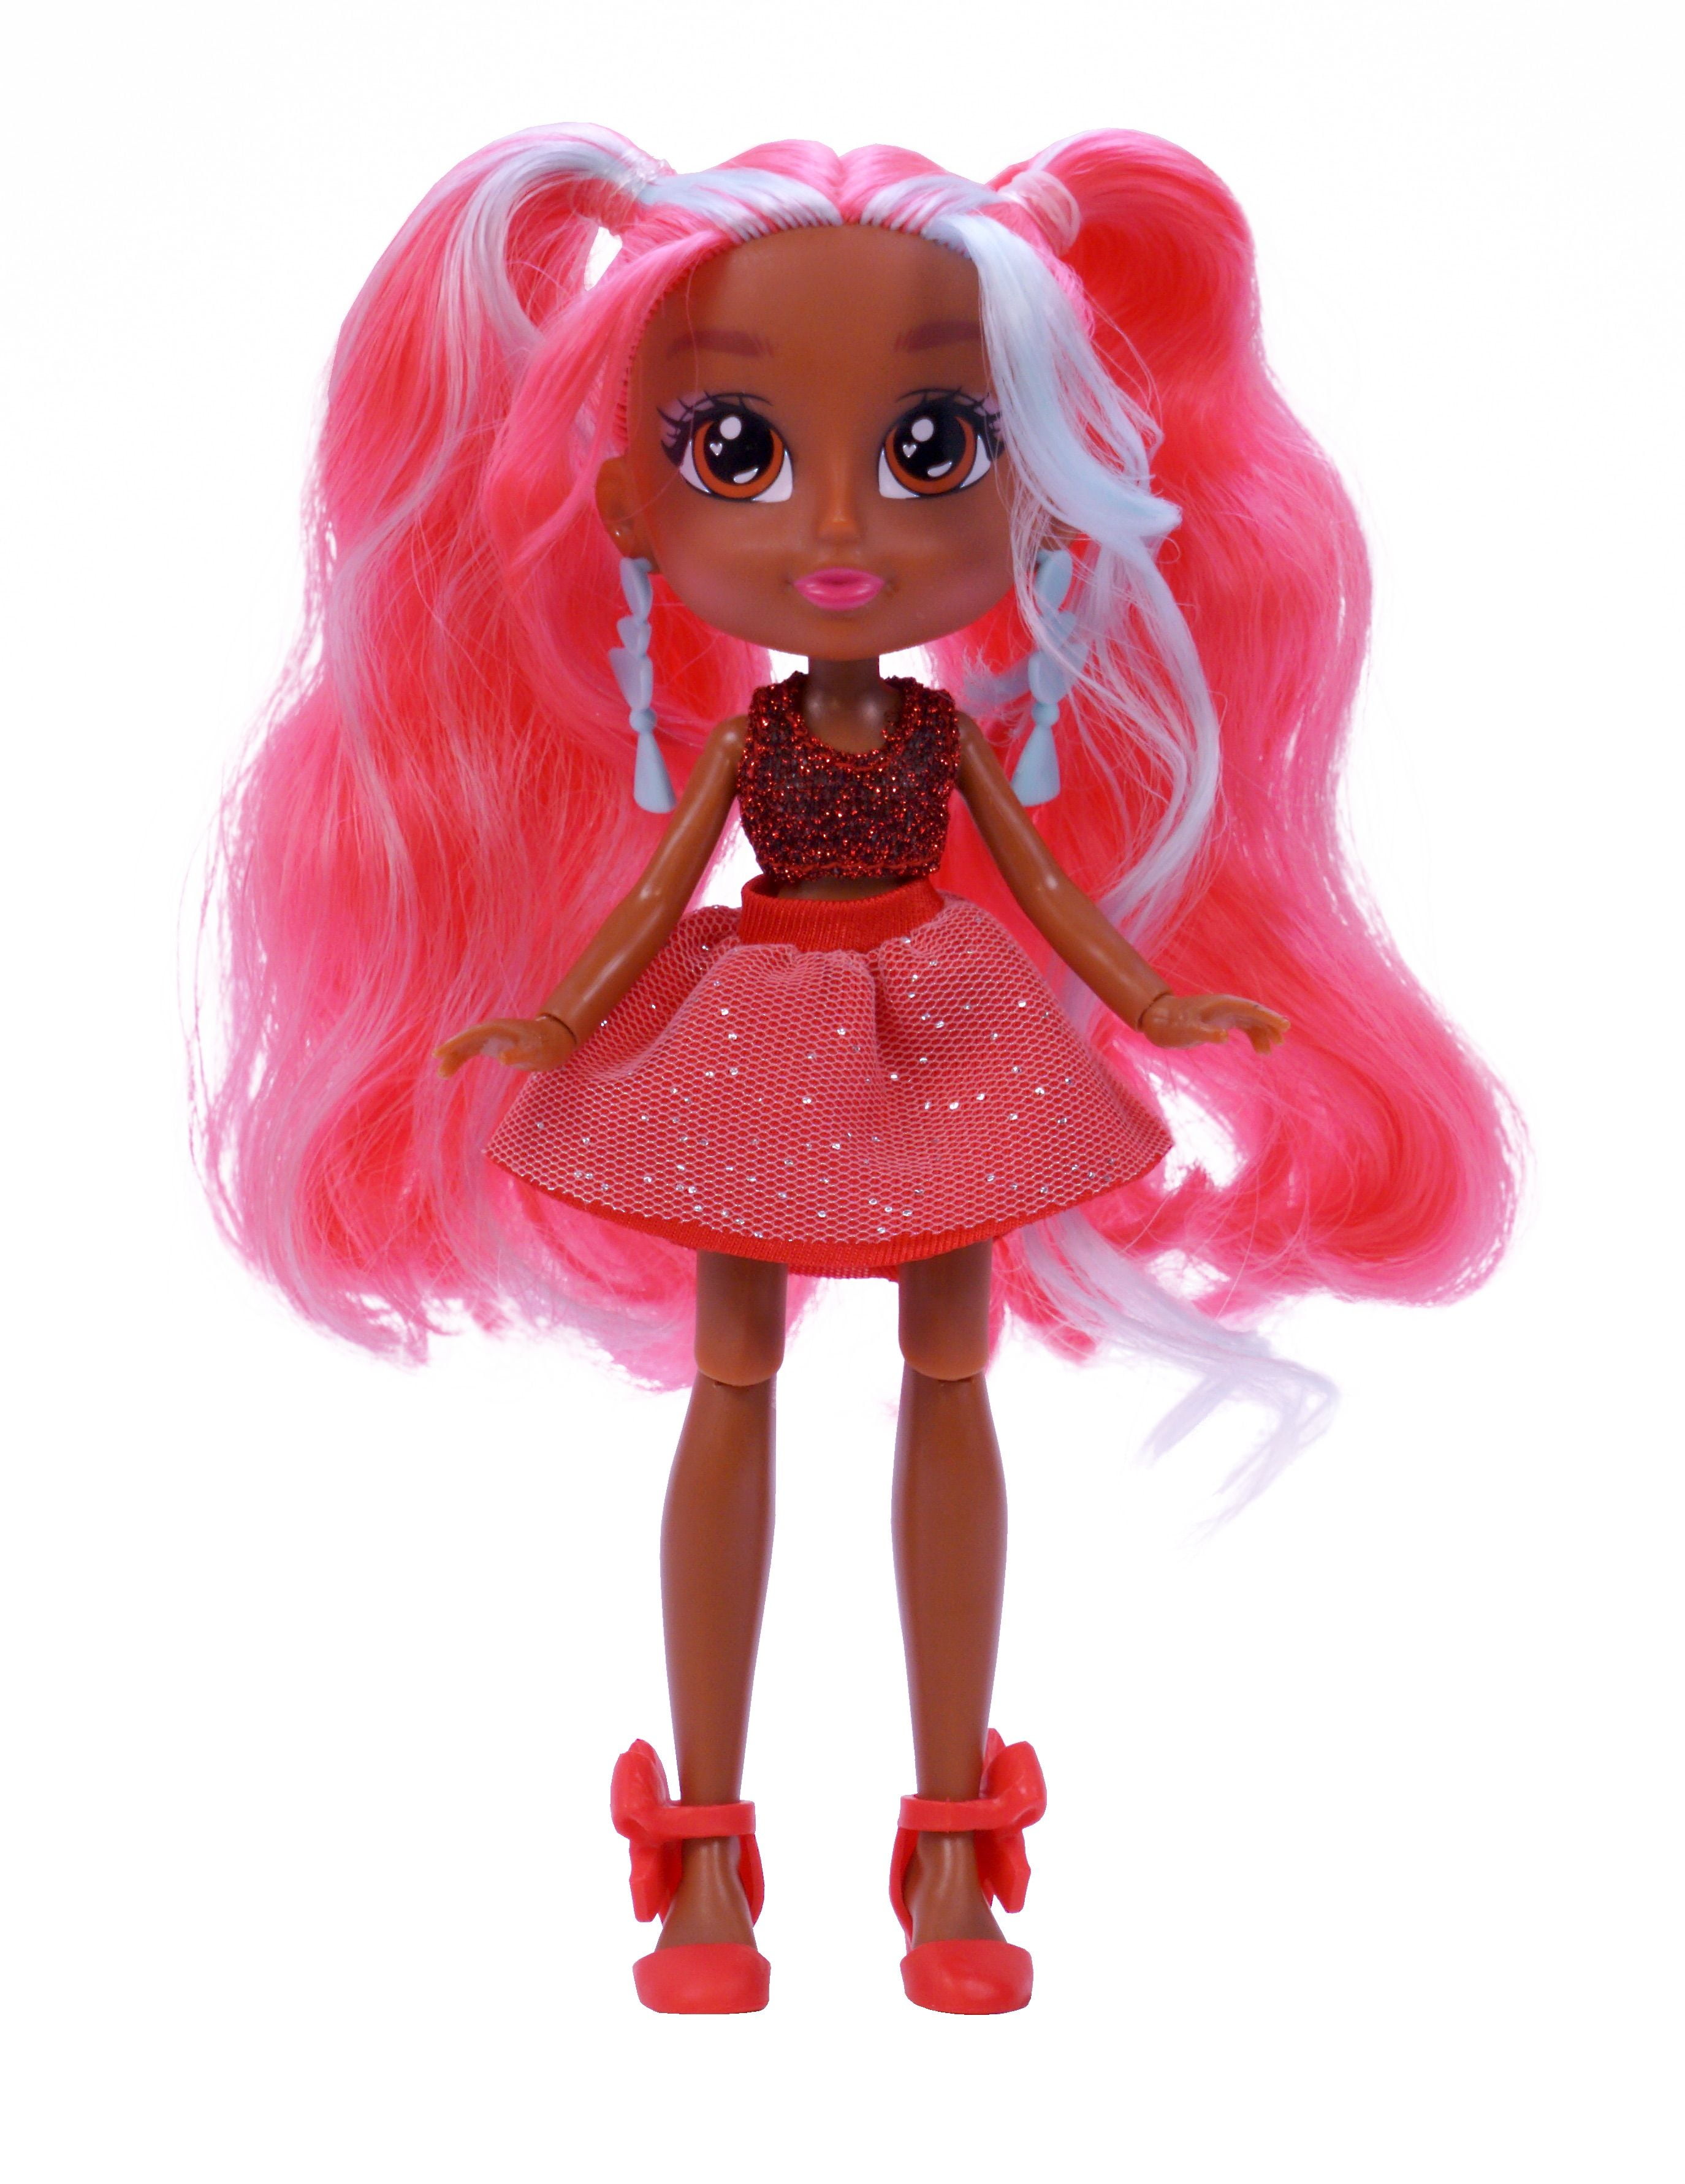 Girl Wigs Felt Non Paper Doll Outfit 20% OFF SALE